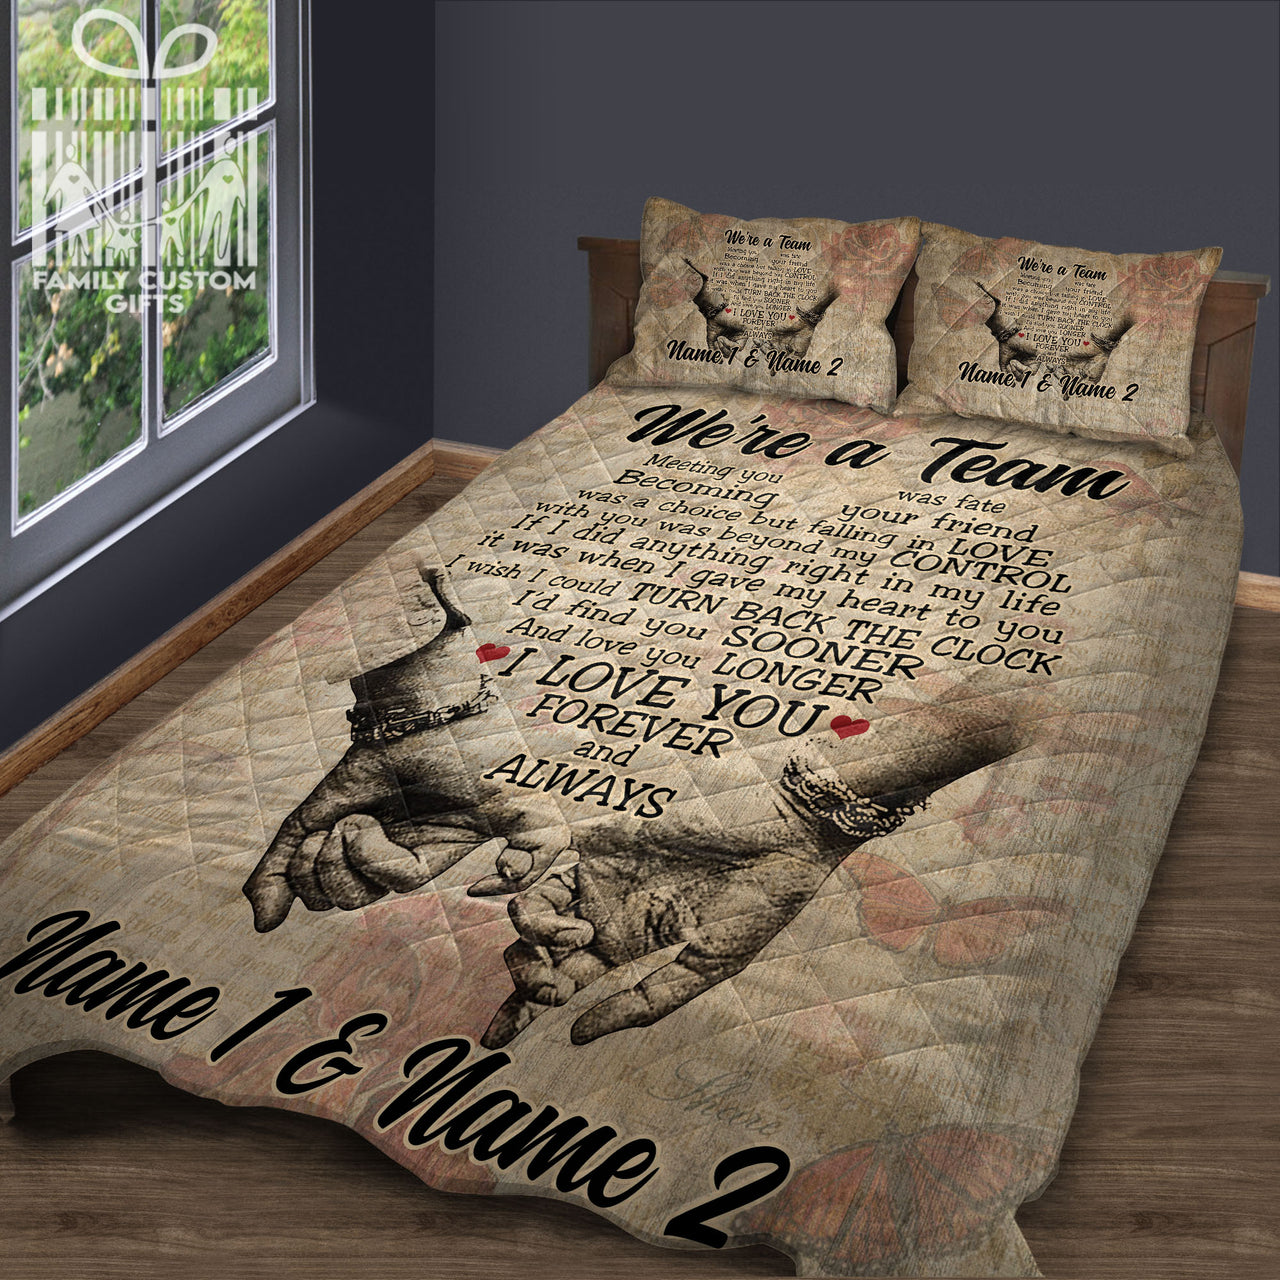 Custom Quilt Sets for Couple We're A Team Personalized Quilt Bedding - Couples Gift, Anniversary Gift